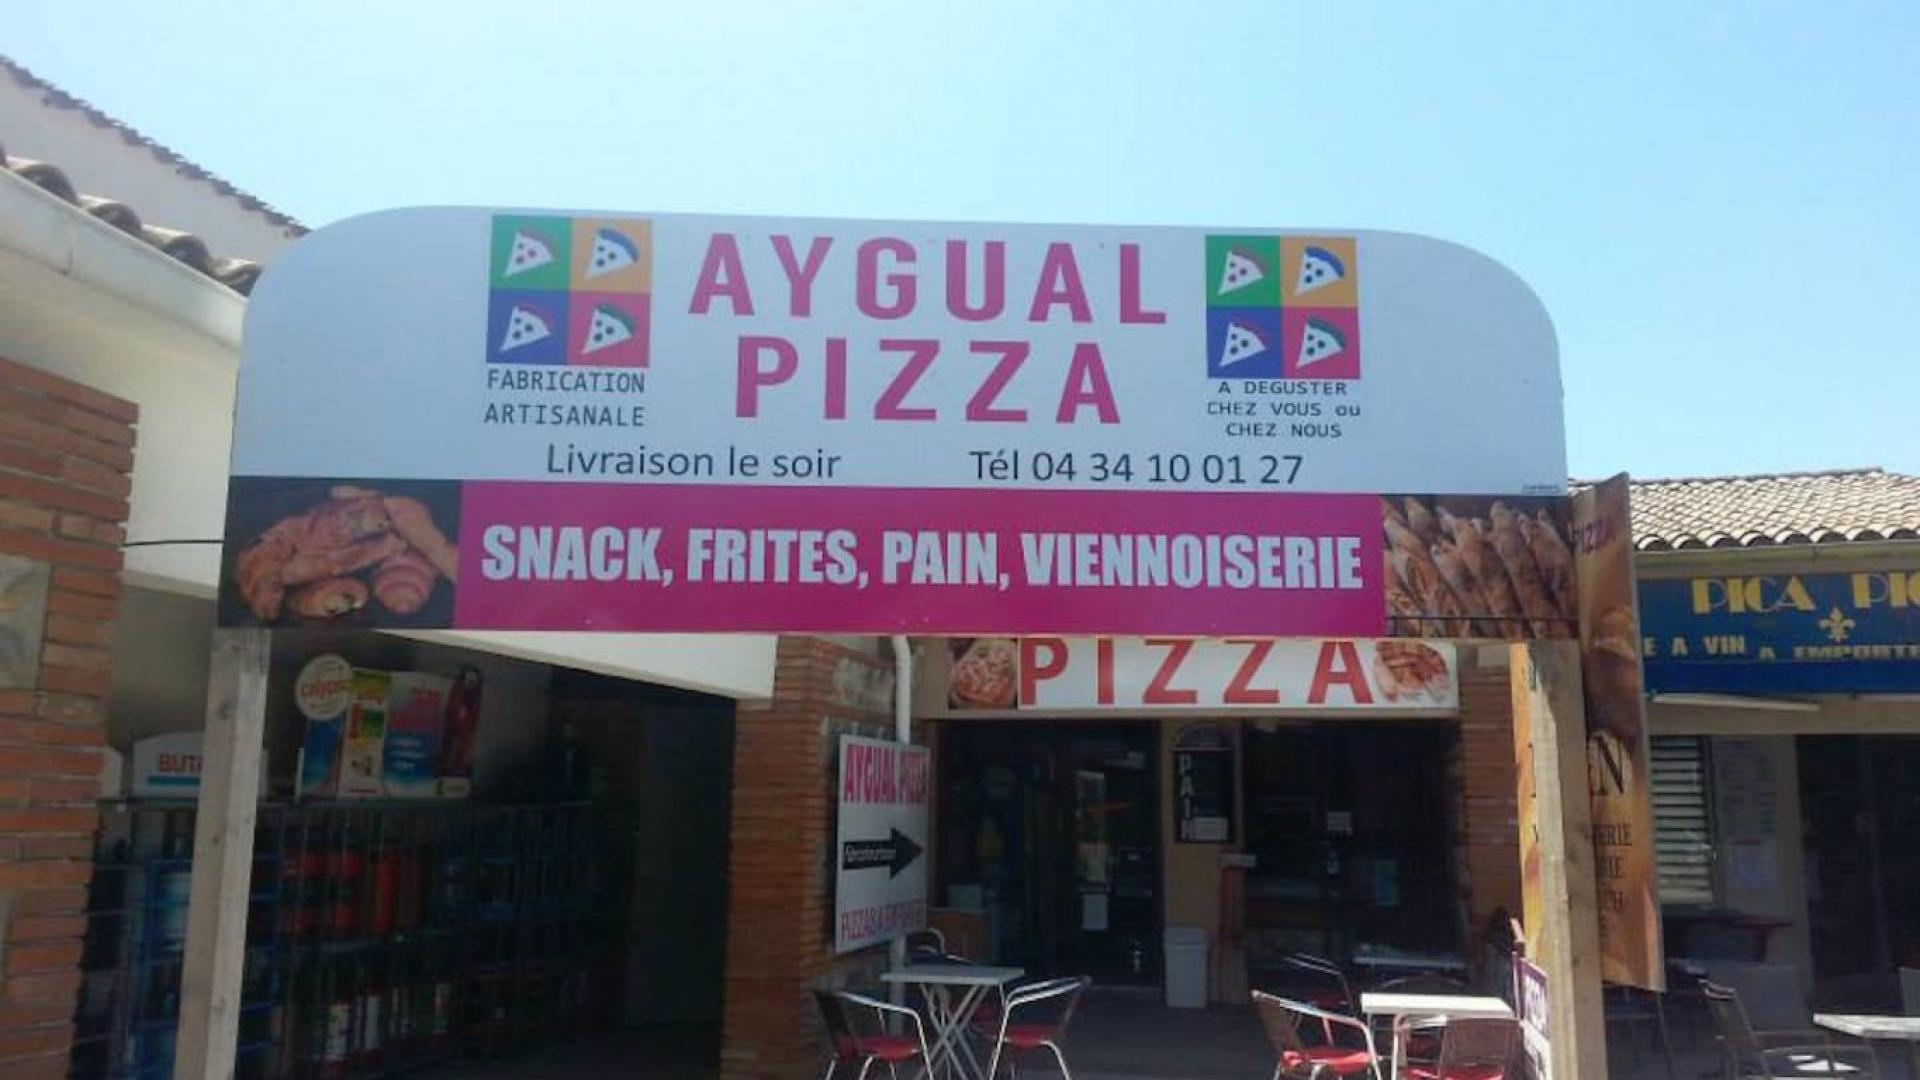 AYGUAL PIZZA